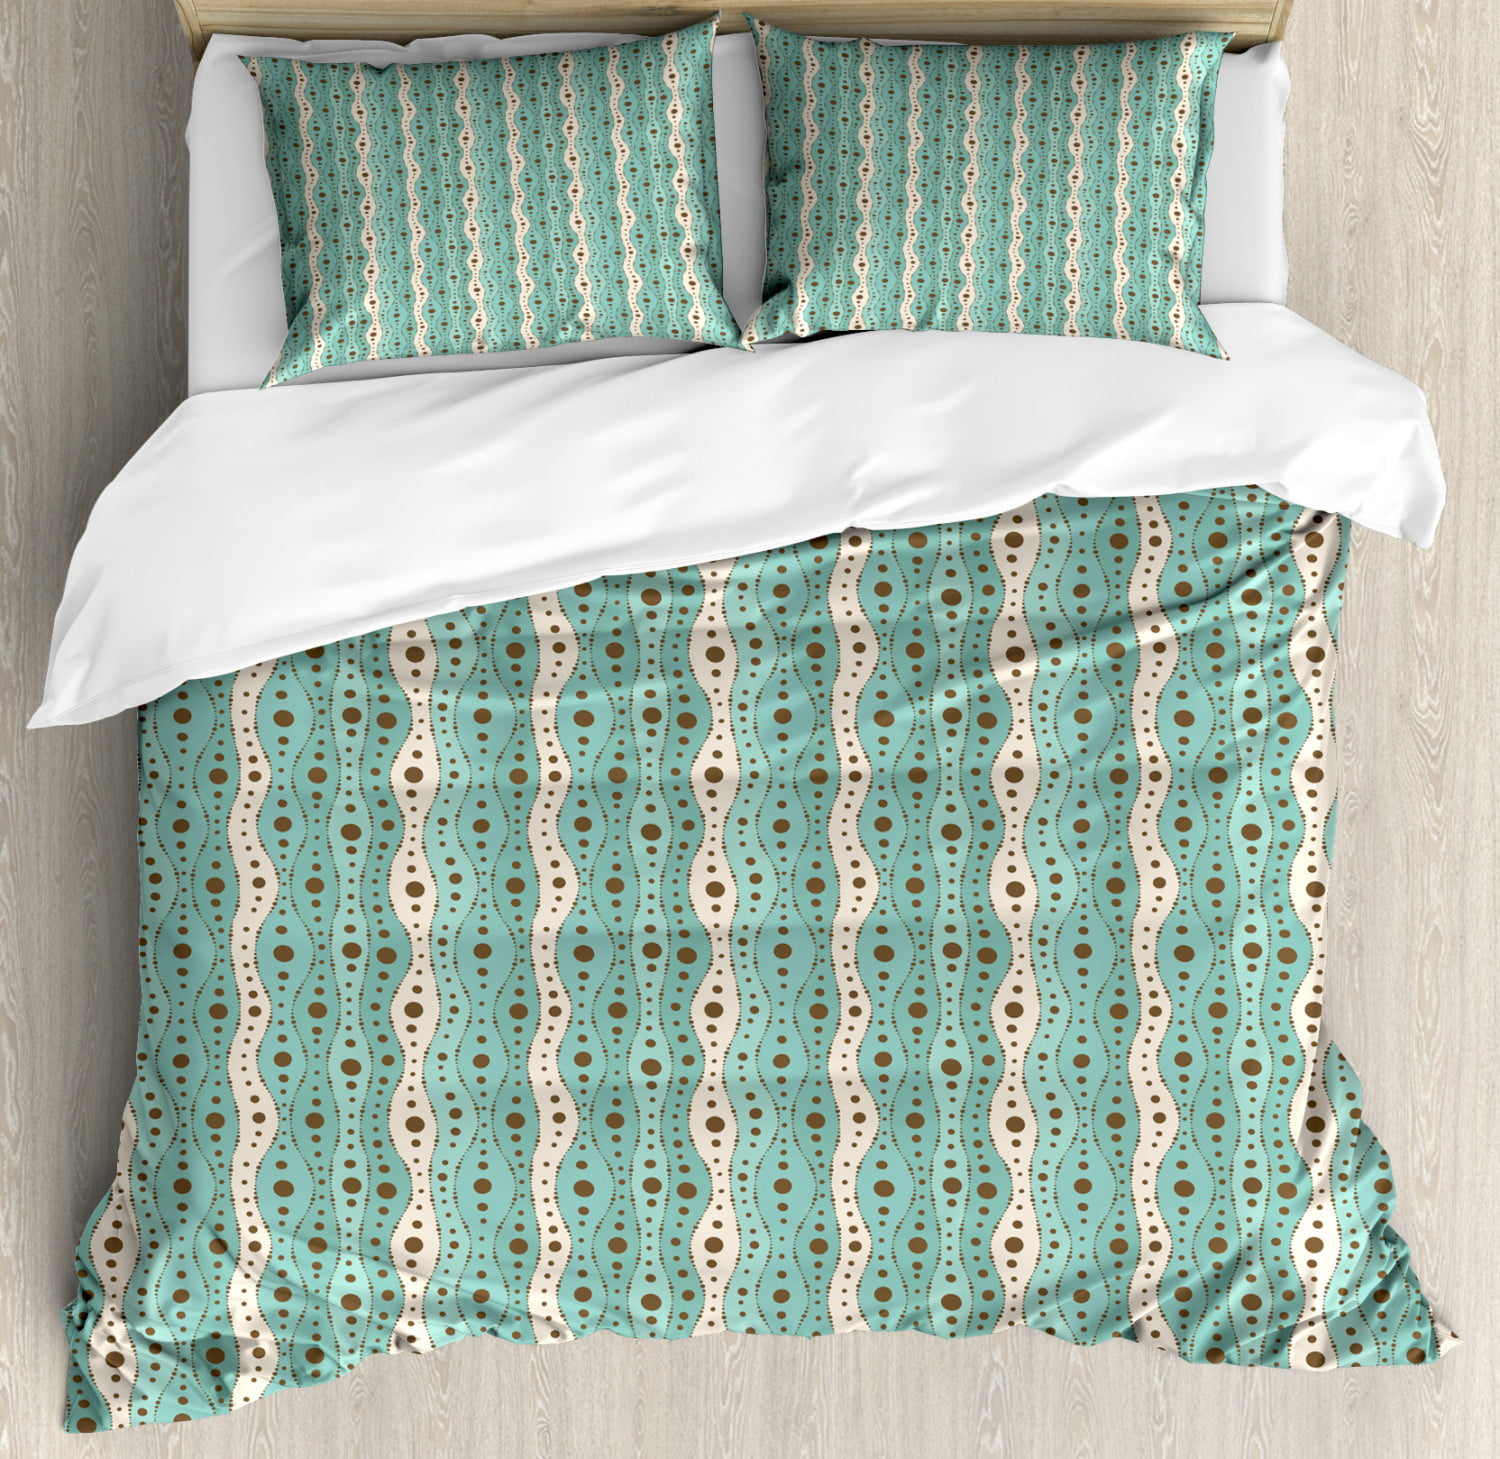 Turquoise Duvet Cover Set Traditional Polka Dots Vertical Lines